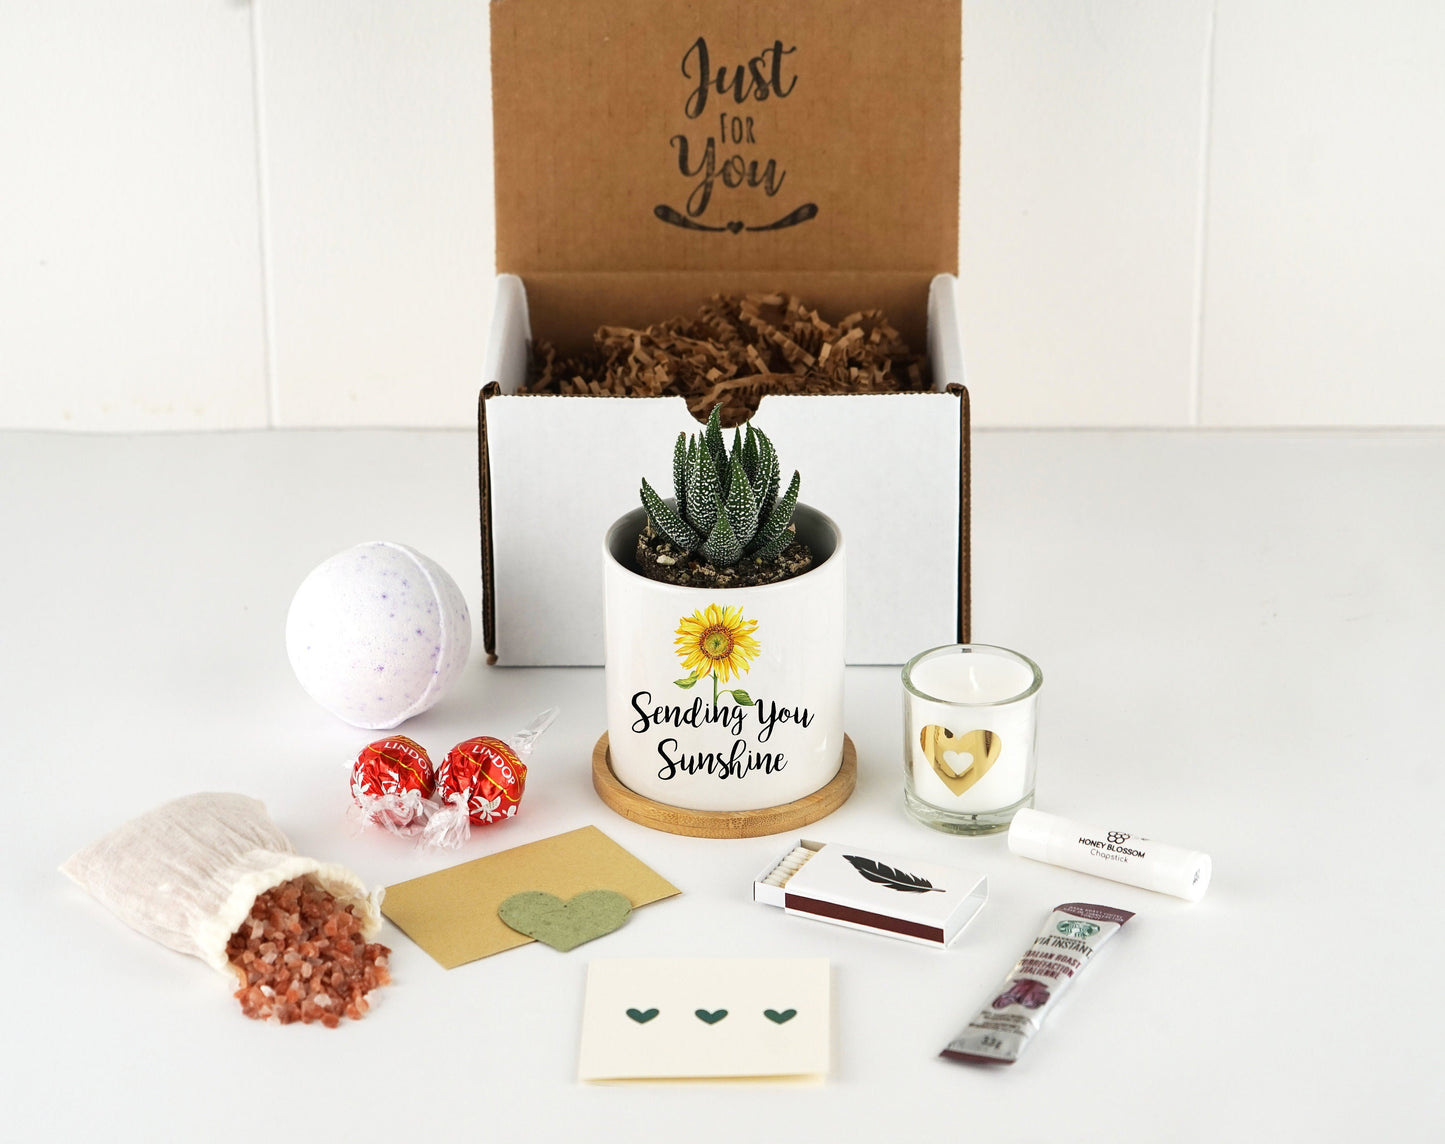 Thinking of You Gift - 3" White Ceramic Pot w/ Bamboo Tray - Succulent Gift - Missing You - Friendship Gift Box - Care Package FREE SHIPPING